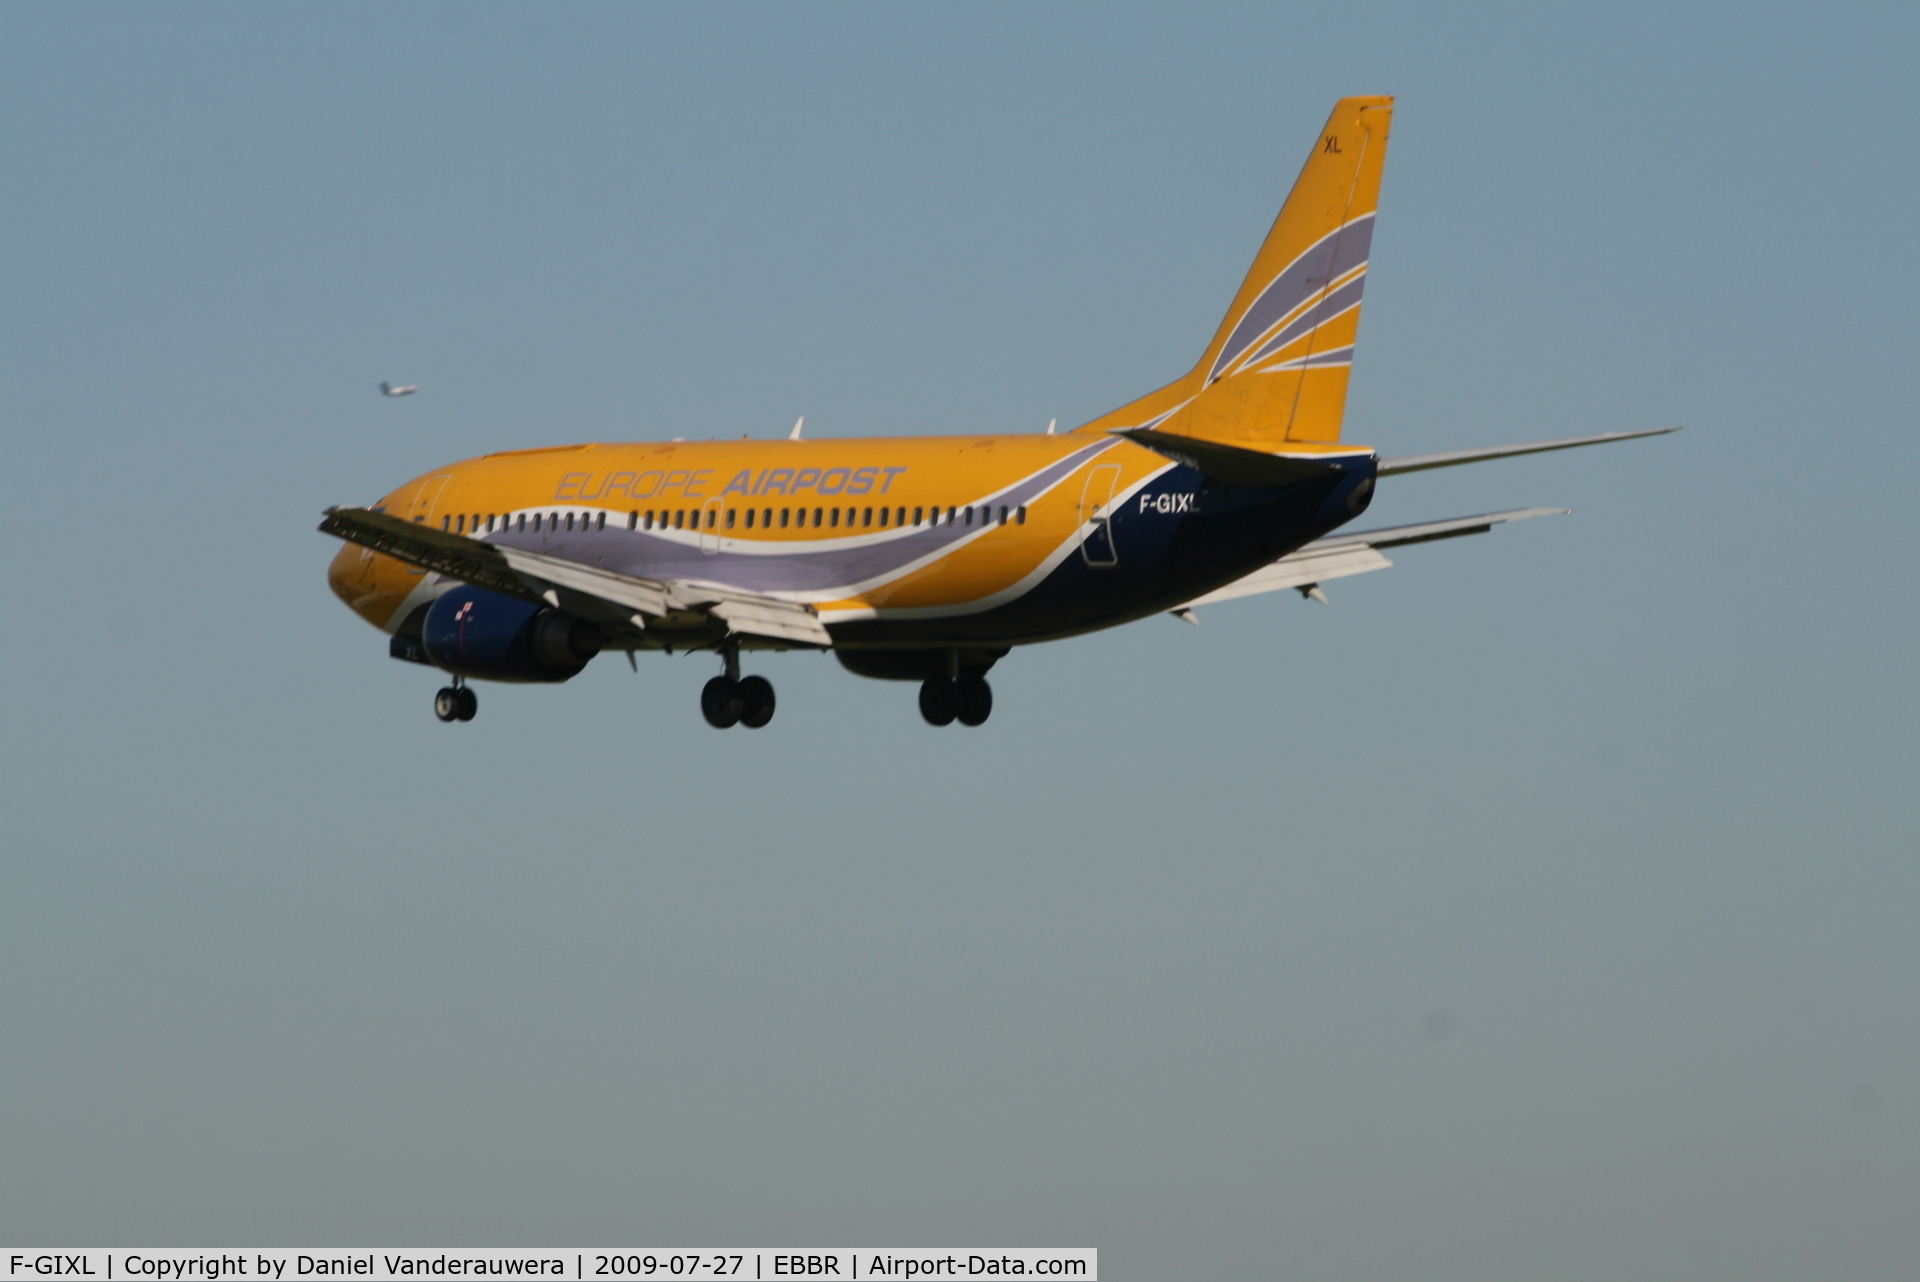 F-GIXL, 1987 Boeing 737-348QC C/N 23810, flight FPO281 is descending to rwy 25L